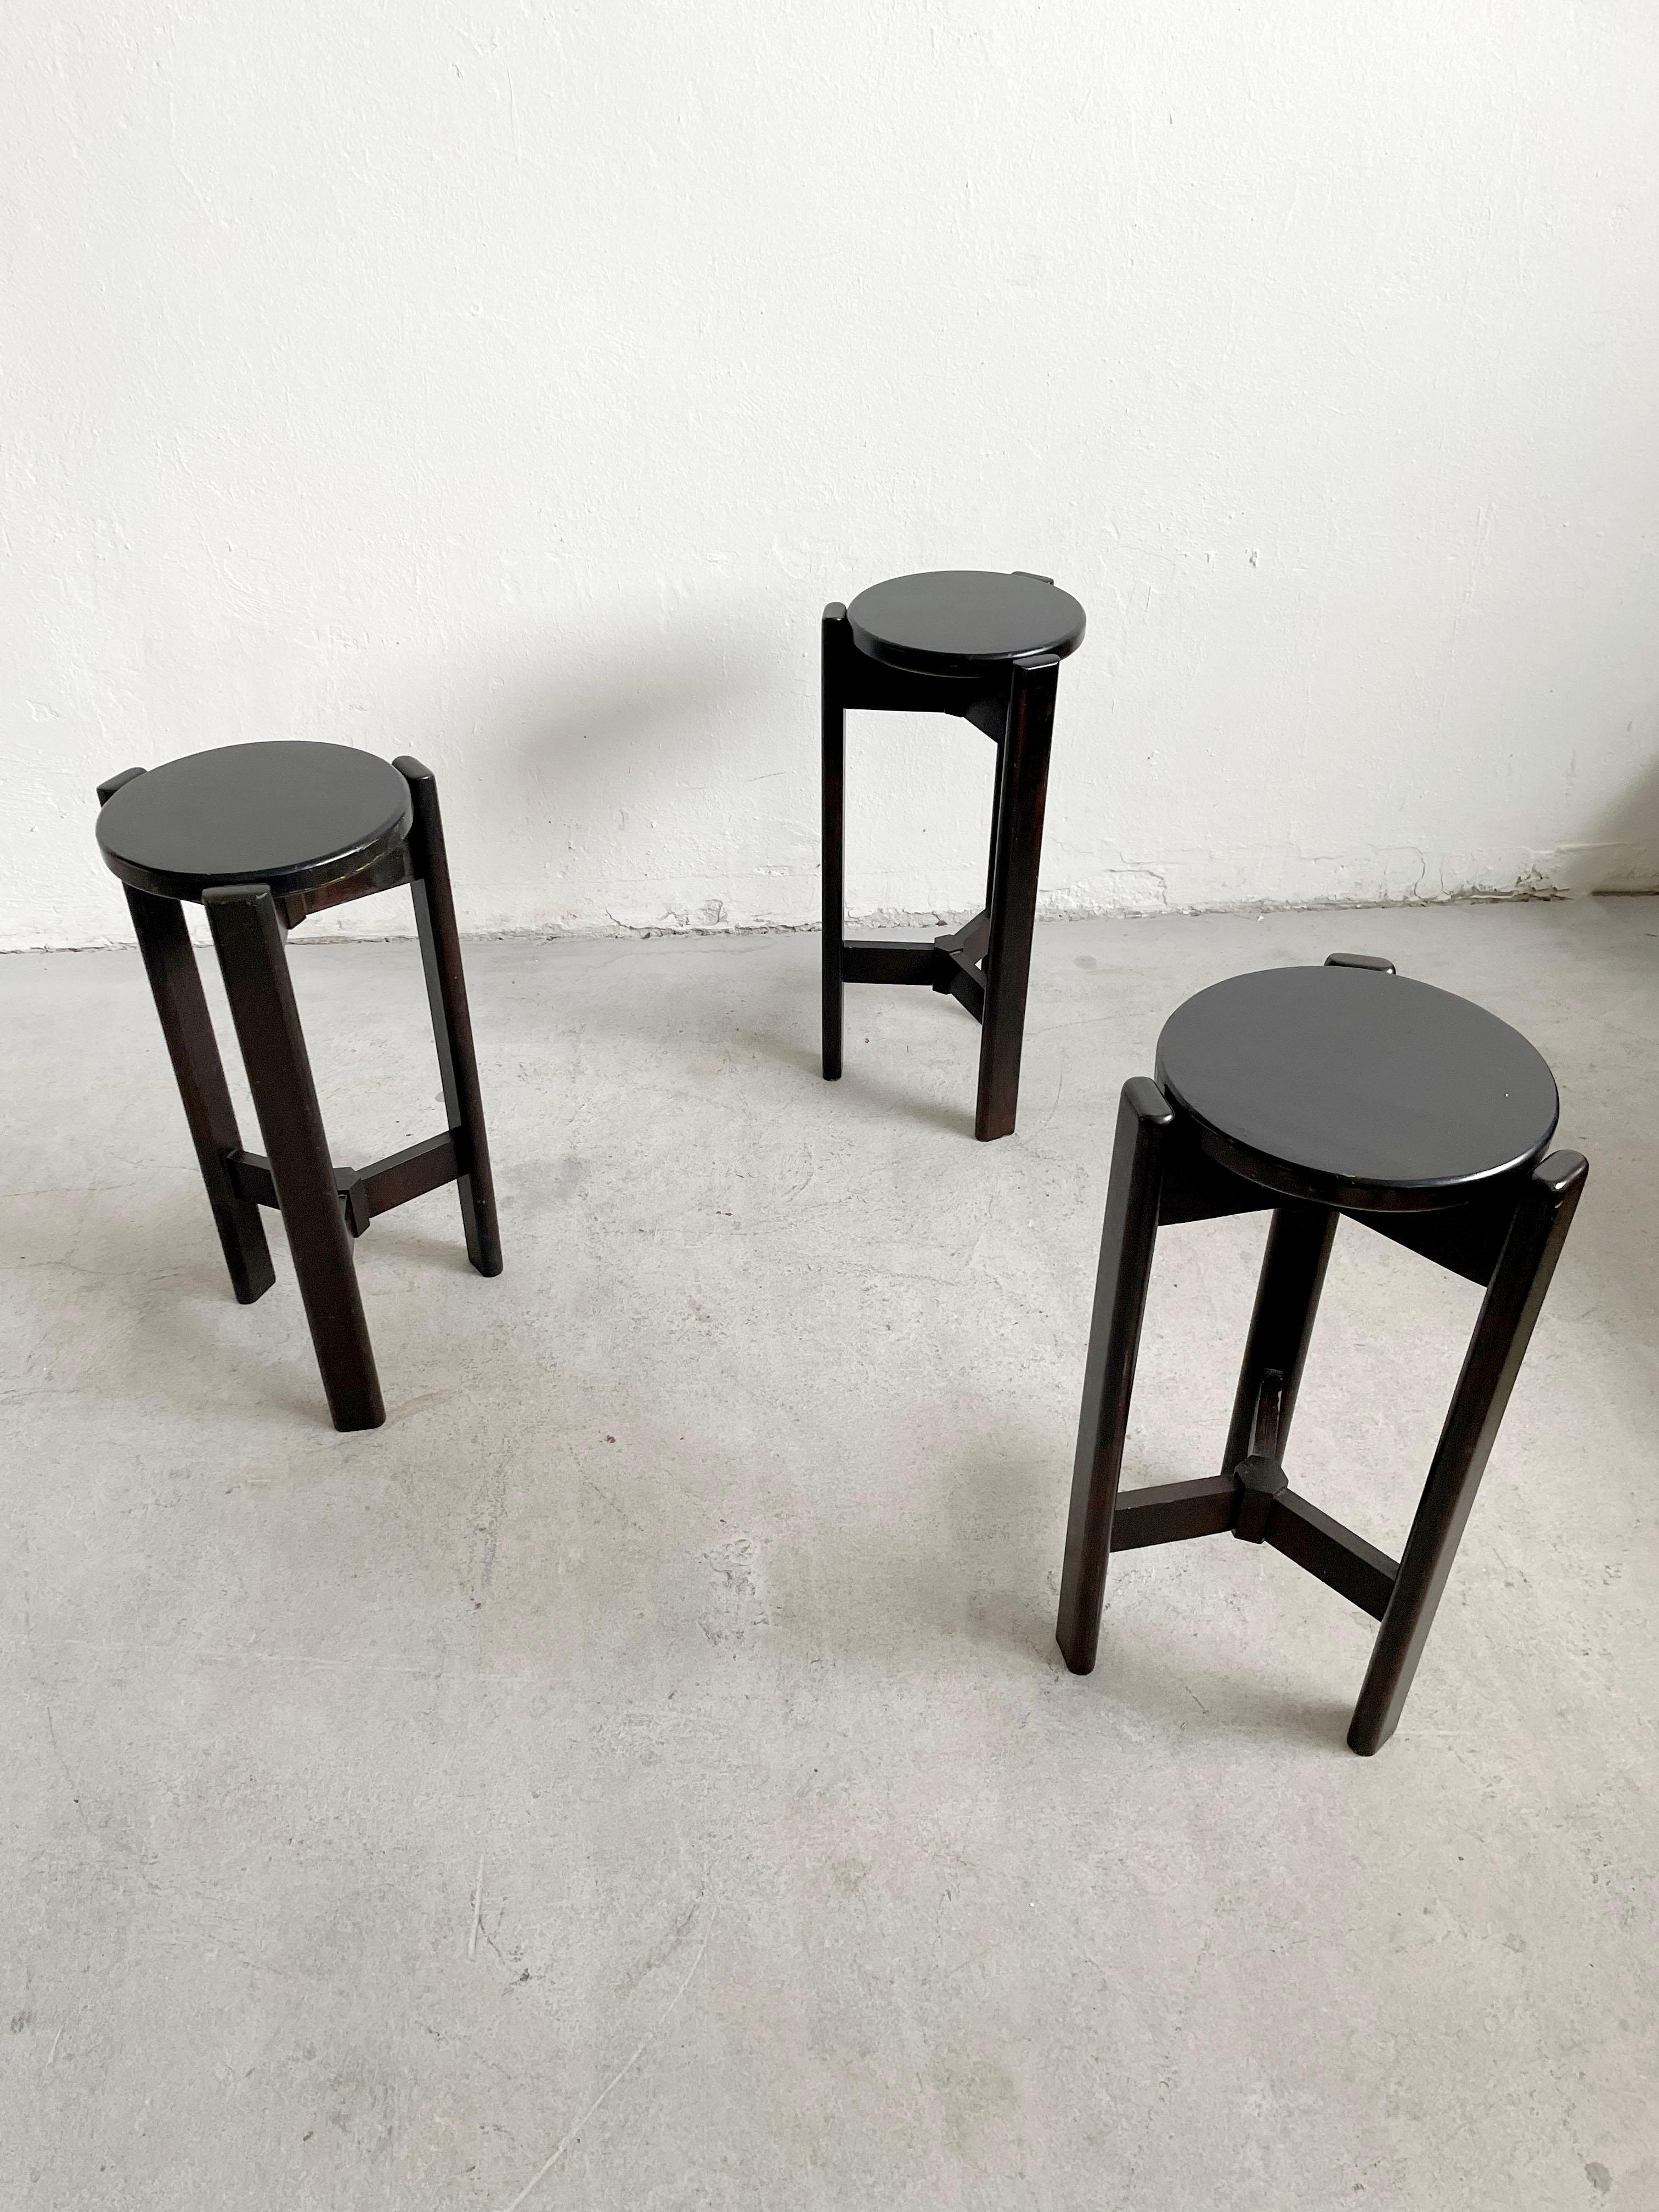 Mid century designer wooden bar stool painted in matte black, c 1960's - 1970's

Design reminiscent of Bruno Rey chairs

Sold as a set of 3 

The chairs are in very good vintage condition with small traces of cosmetic wear. The structure is without